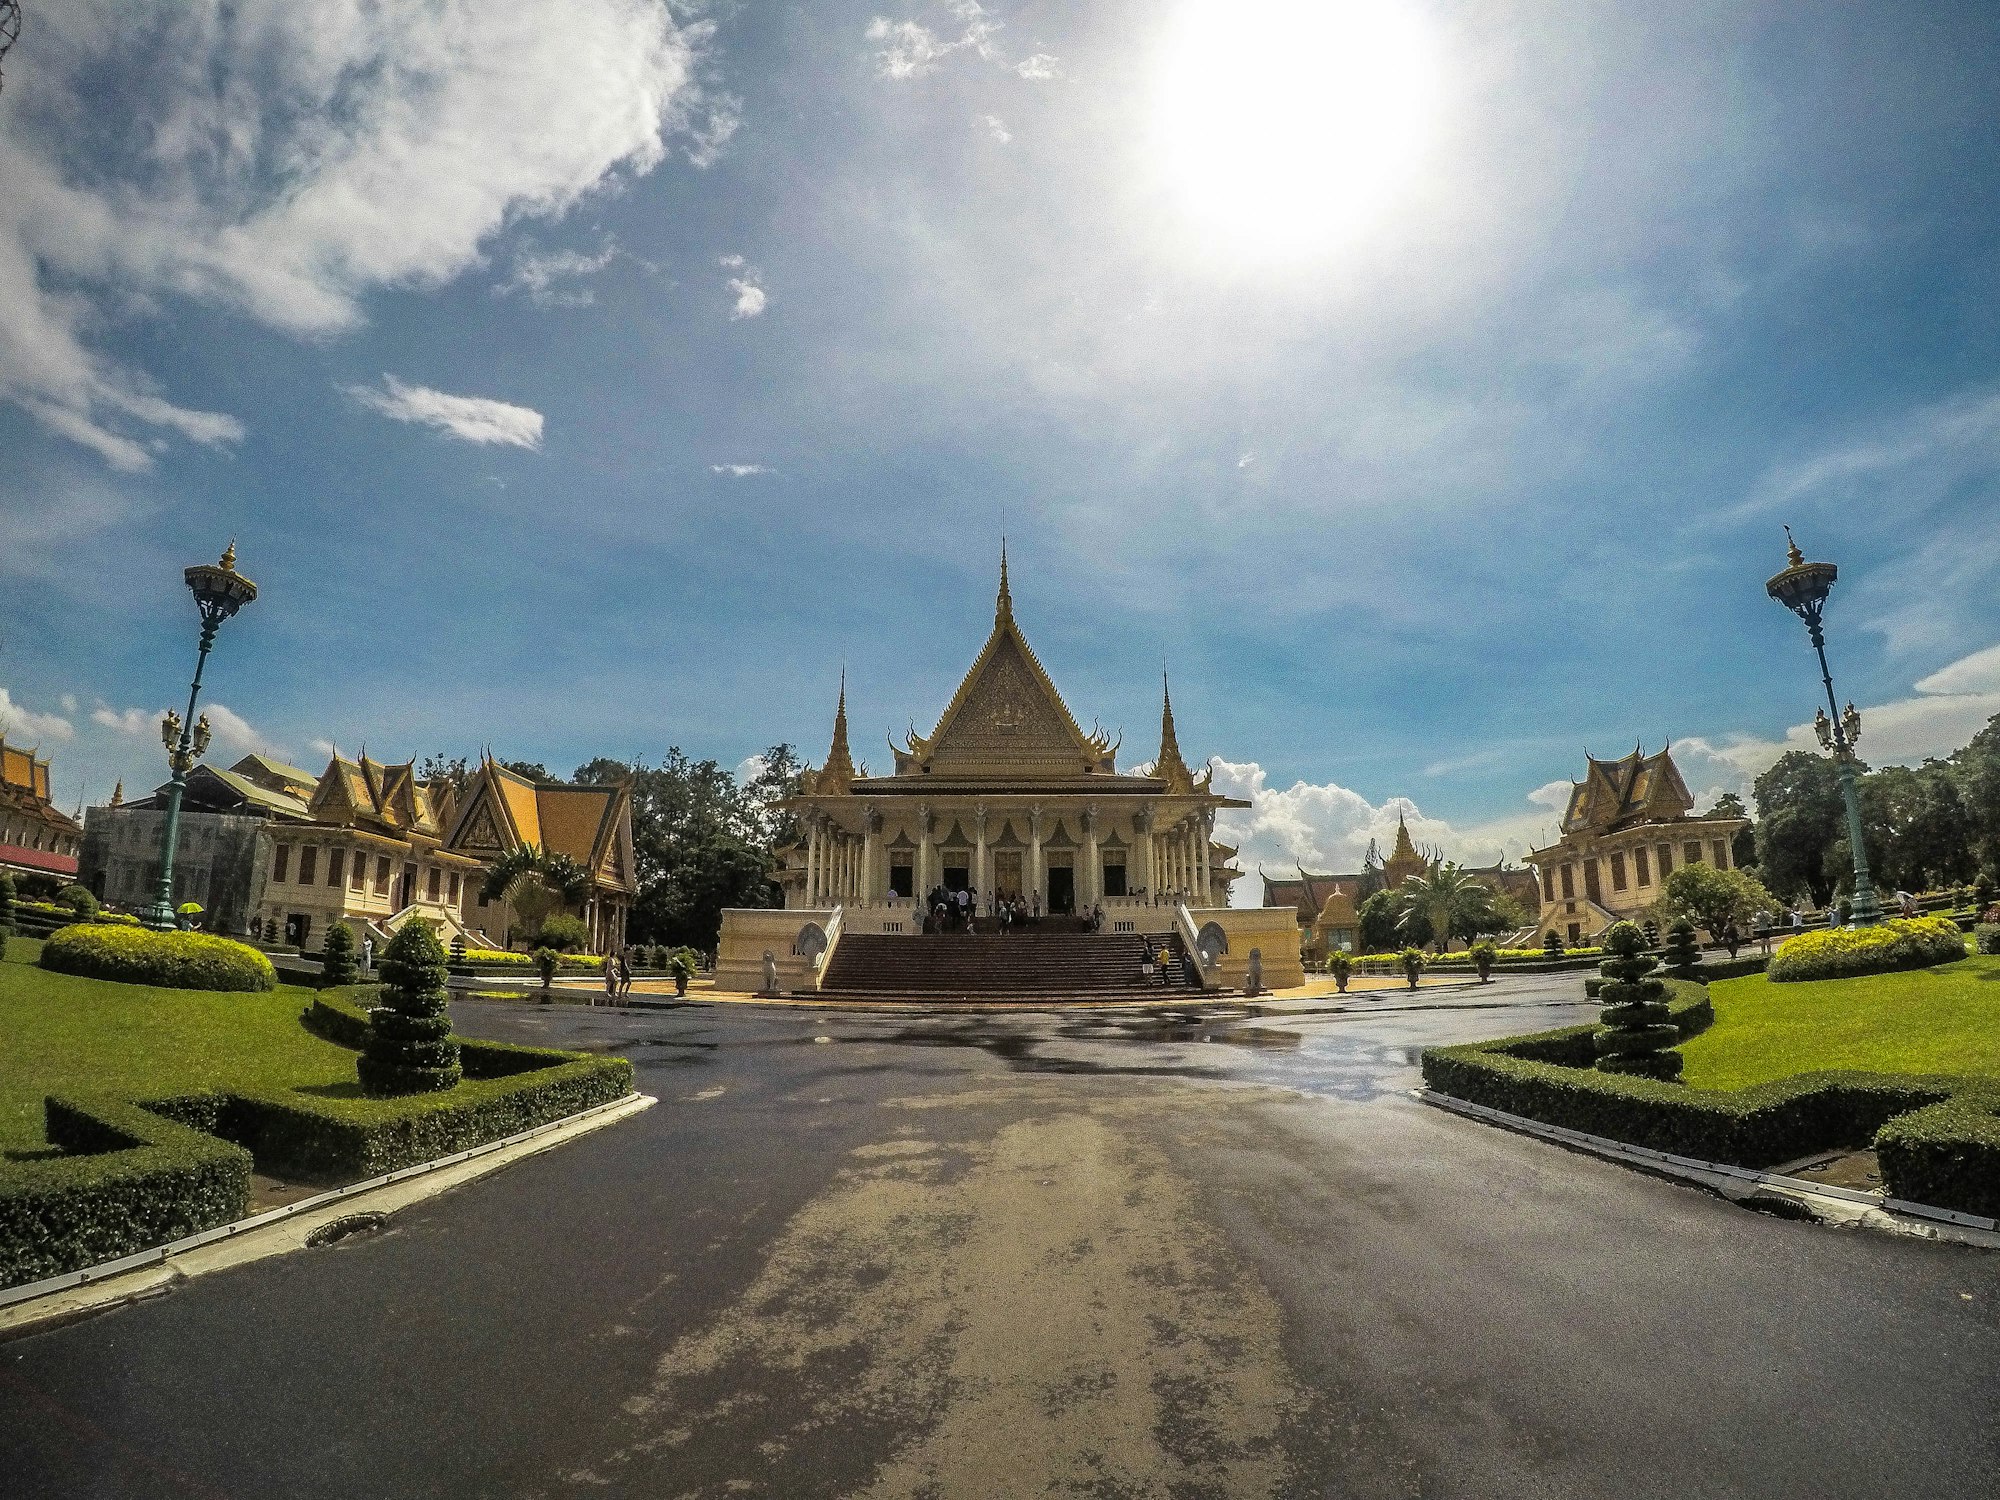 I had the chance to explore the Cambodian Royal Palace in Phnom Penh shortly after it rained. The sky was delightfully bright and blue.